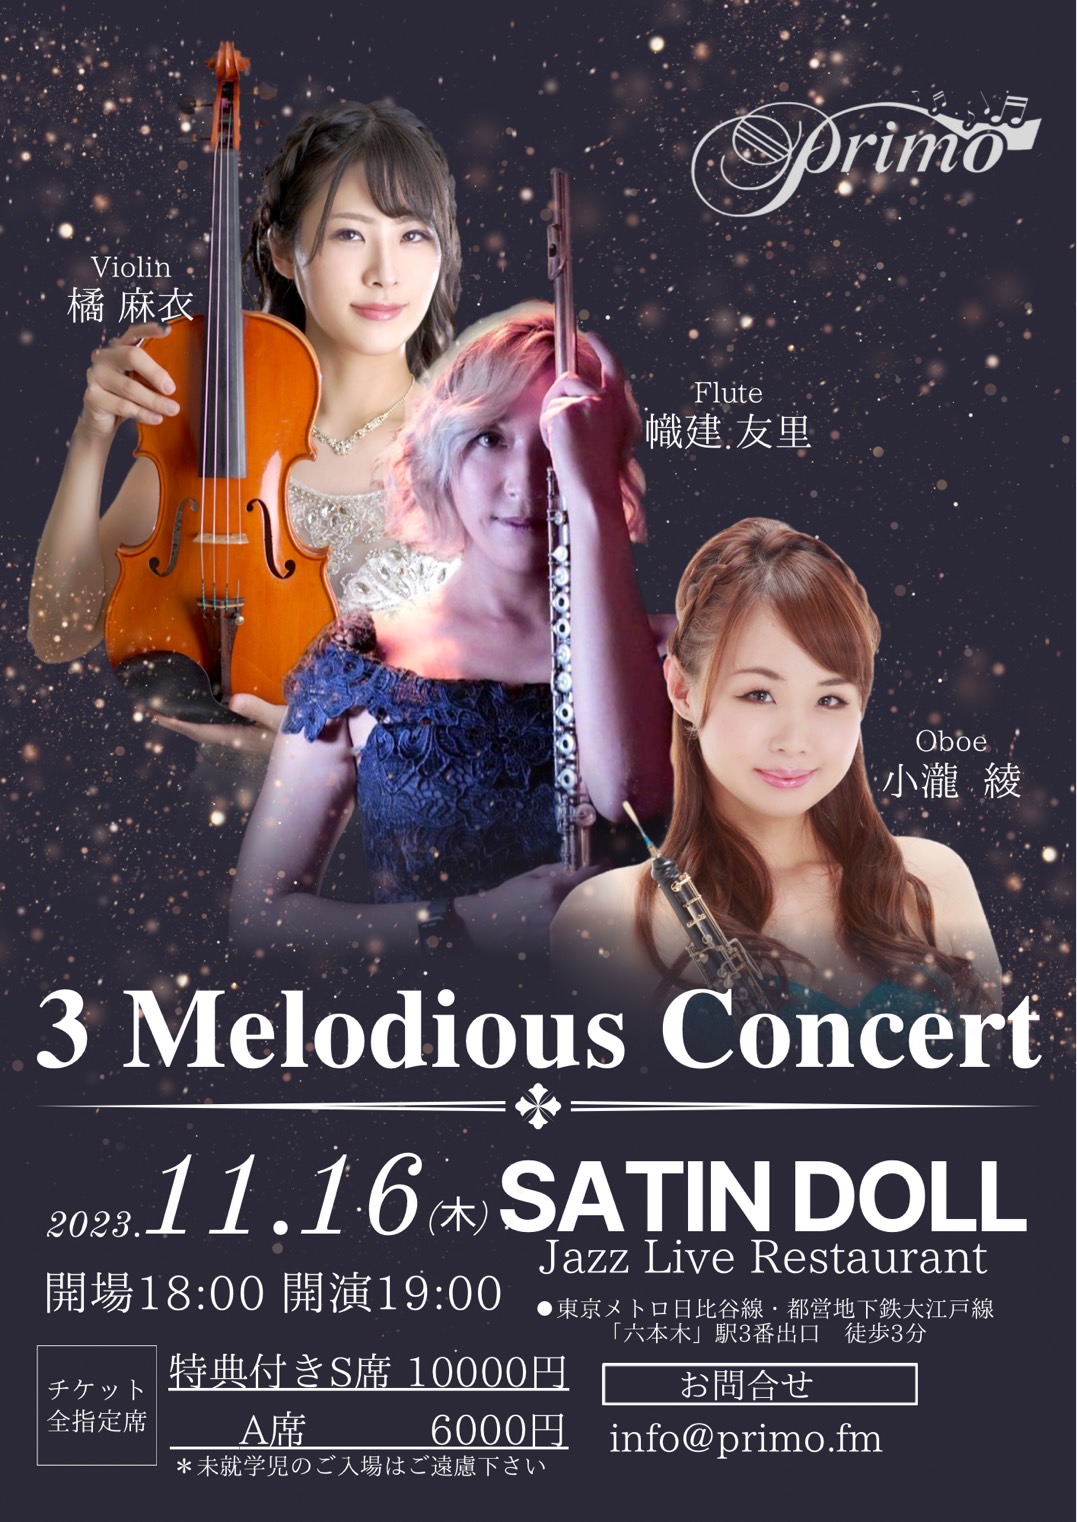 3 Melodious Concert